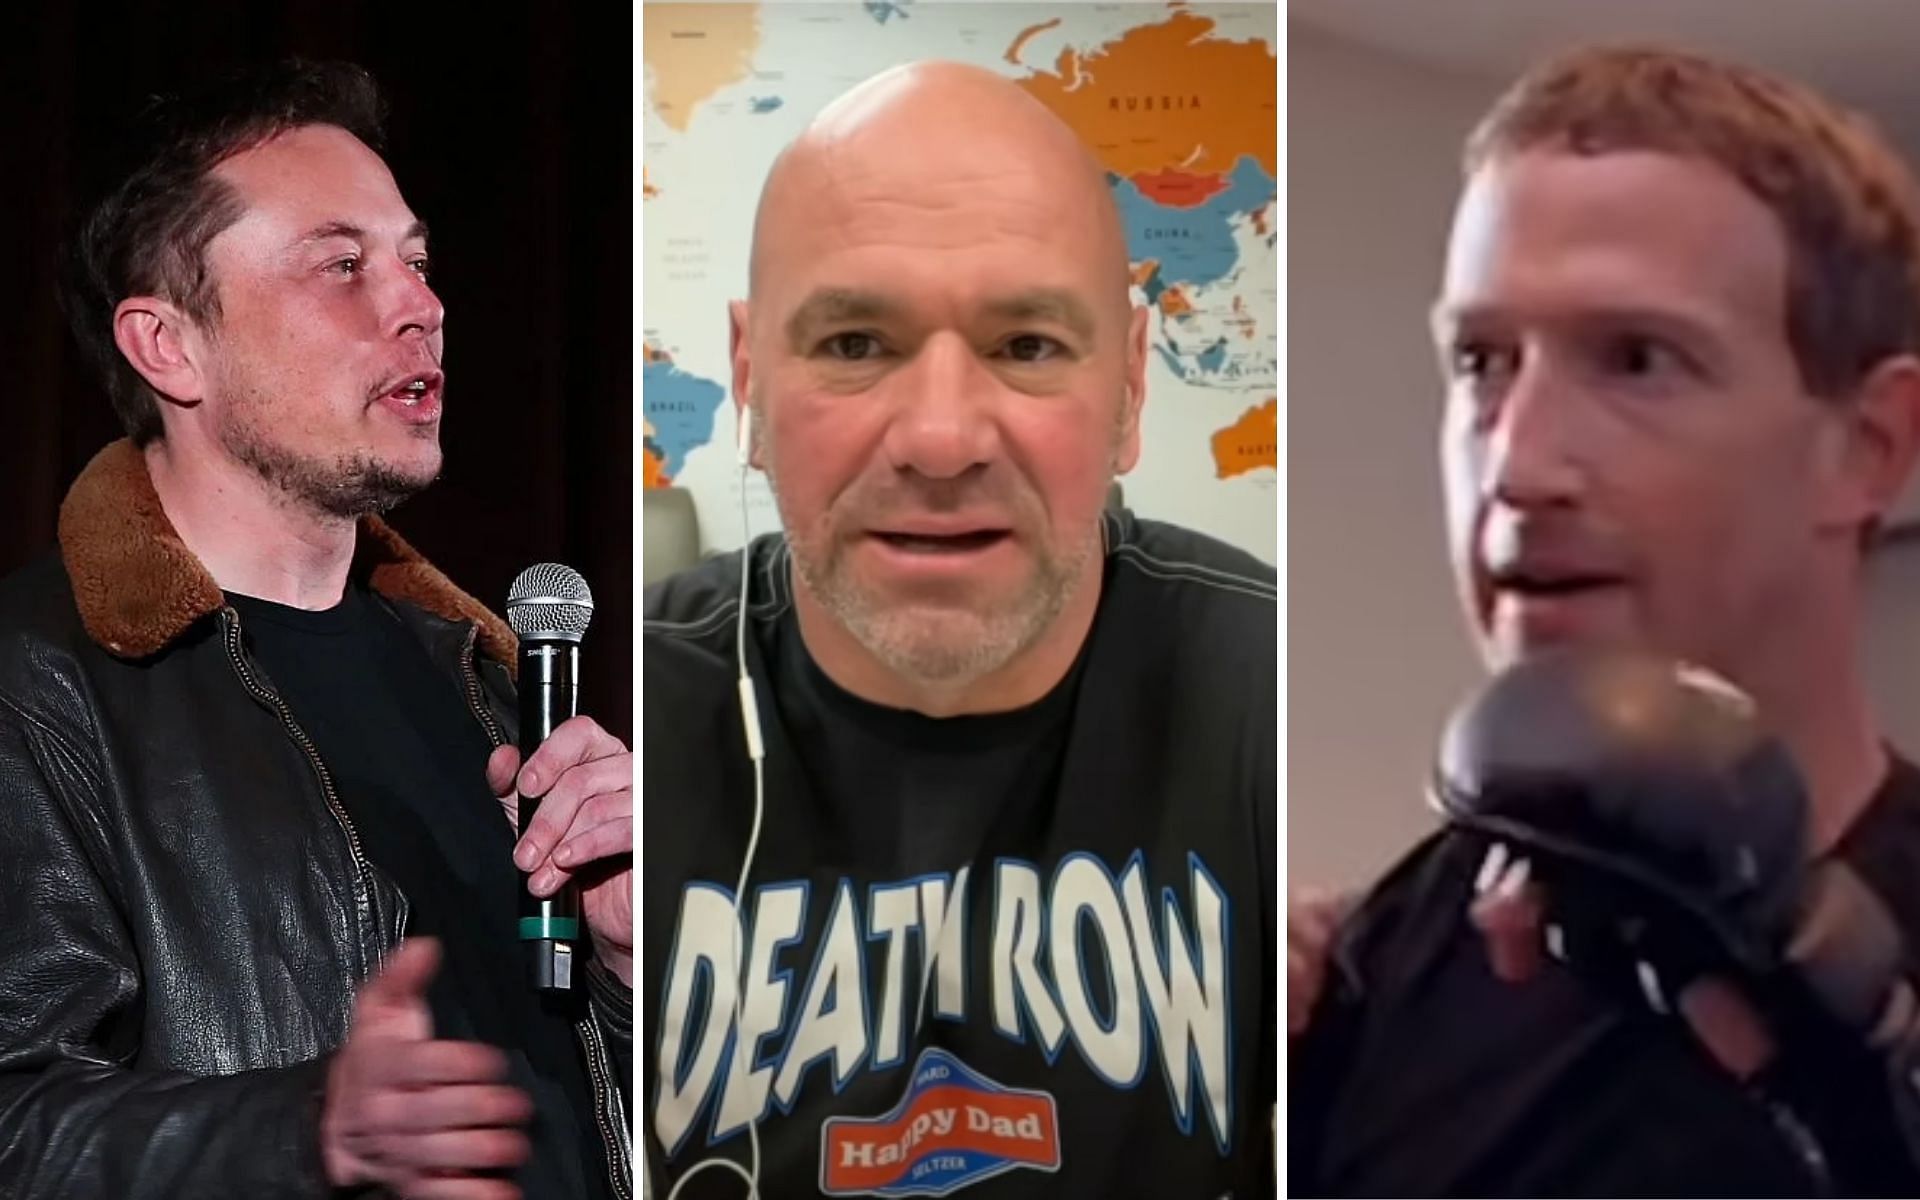 Elon Musk [Left], Dana White [Middle], and Mark Zuckerberg [Right] [Photo credit: The Pat McAfee Show - YouTube, and @CultureCrave - Twitter]